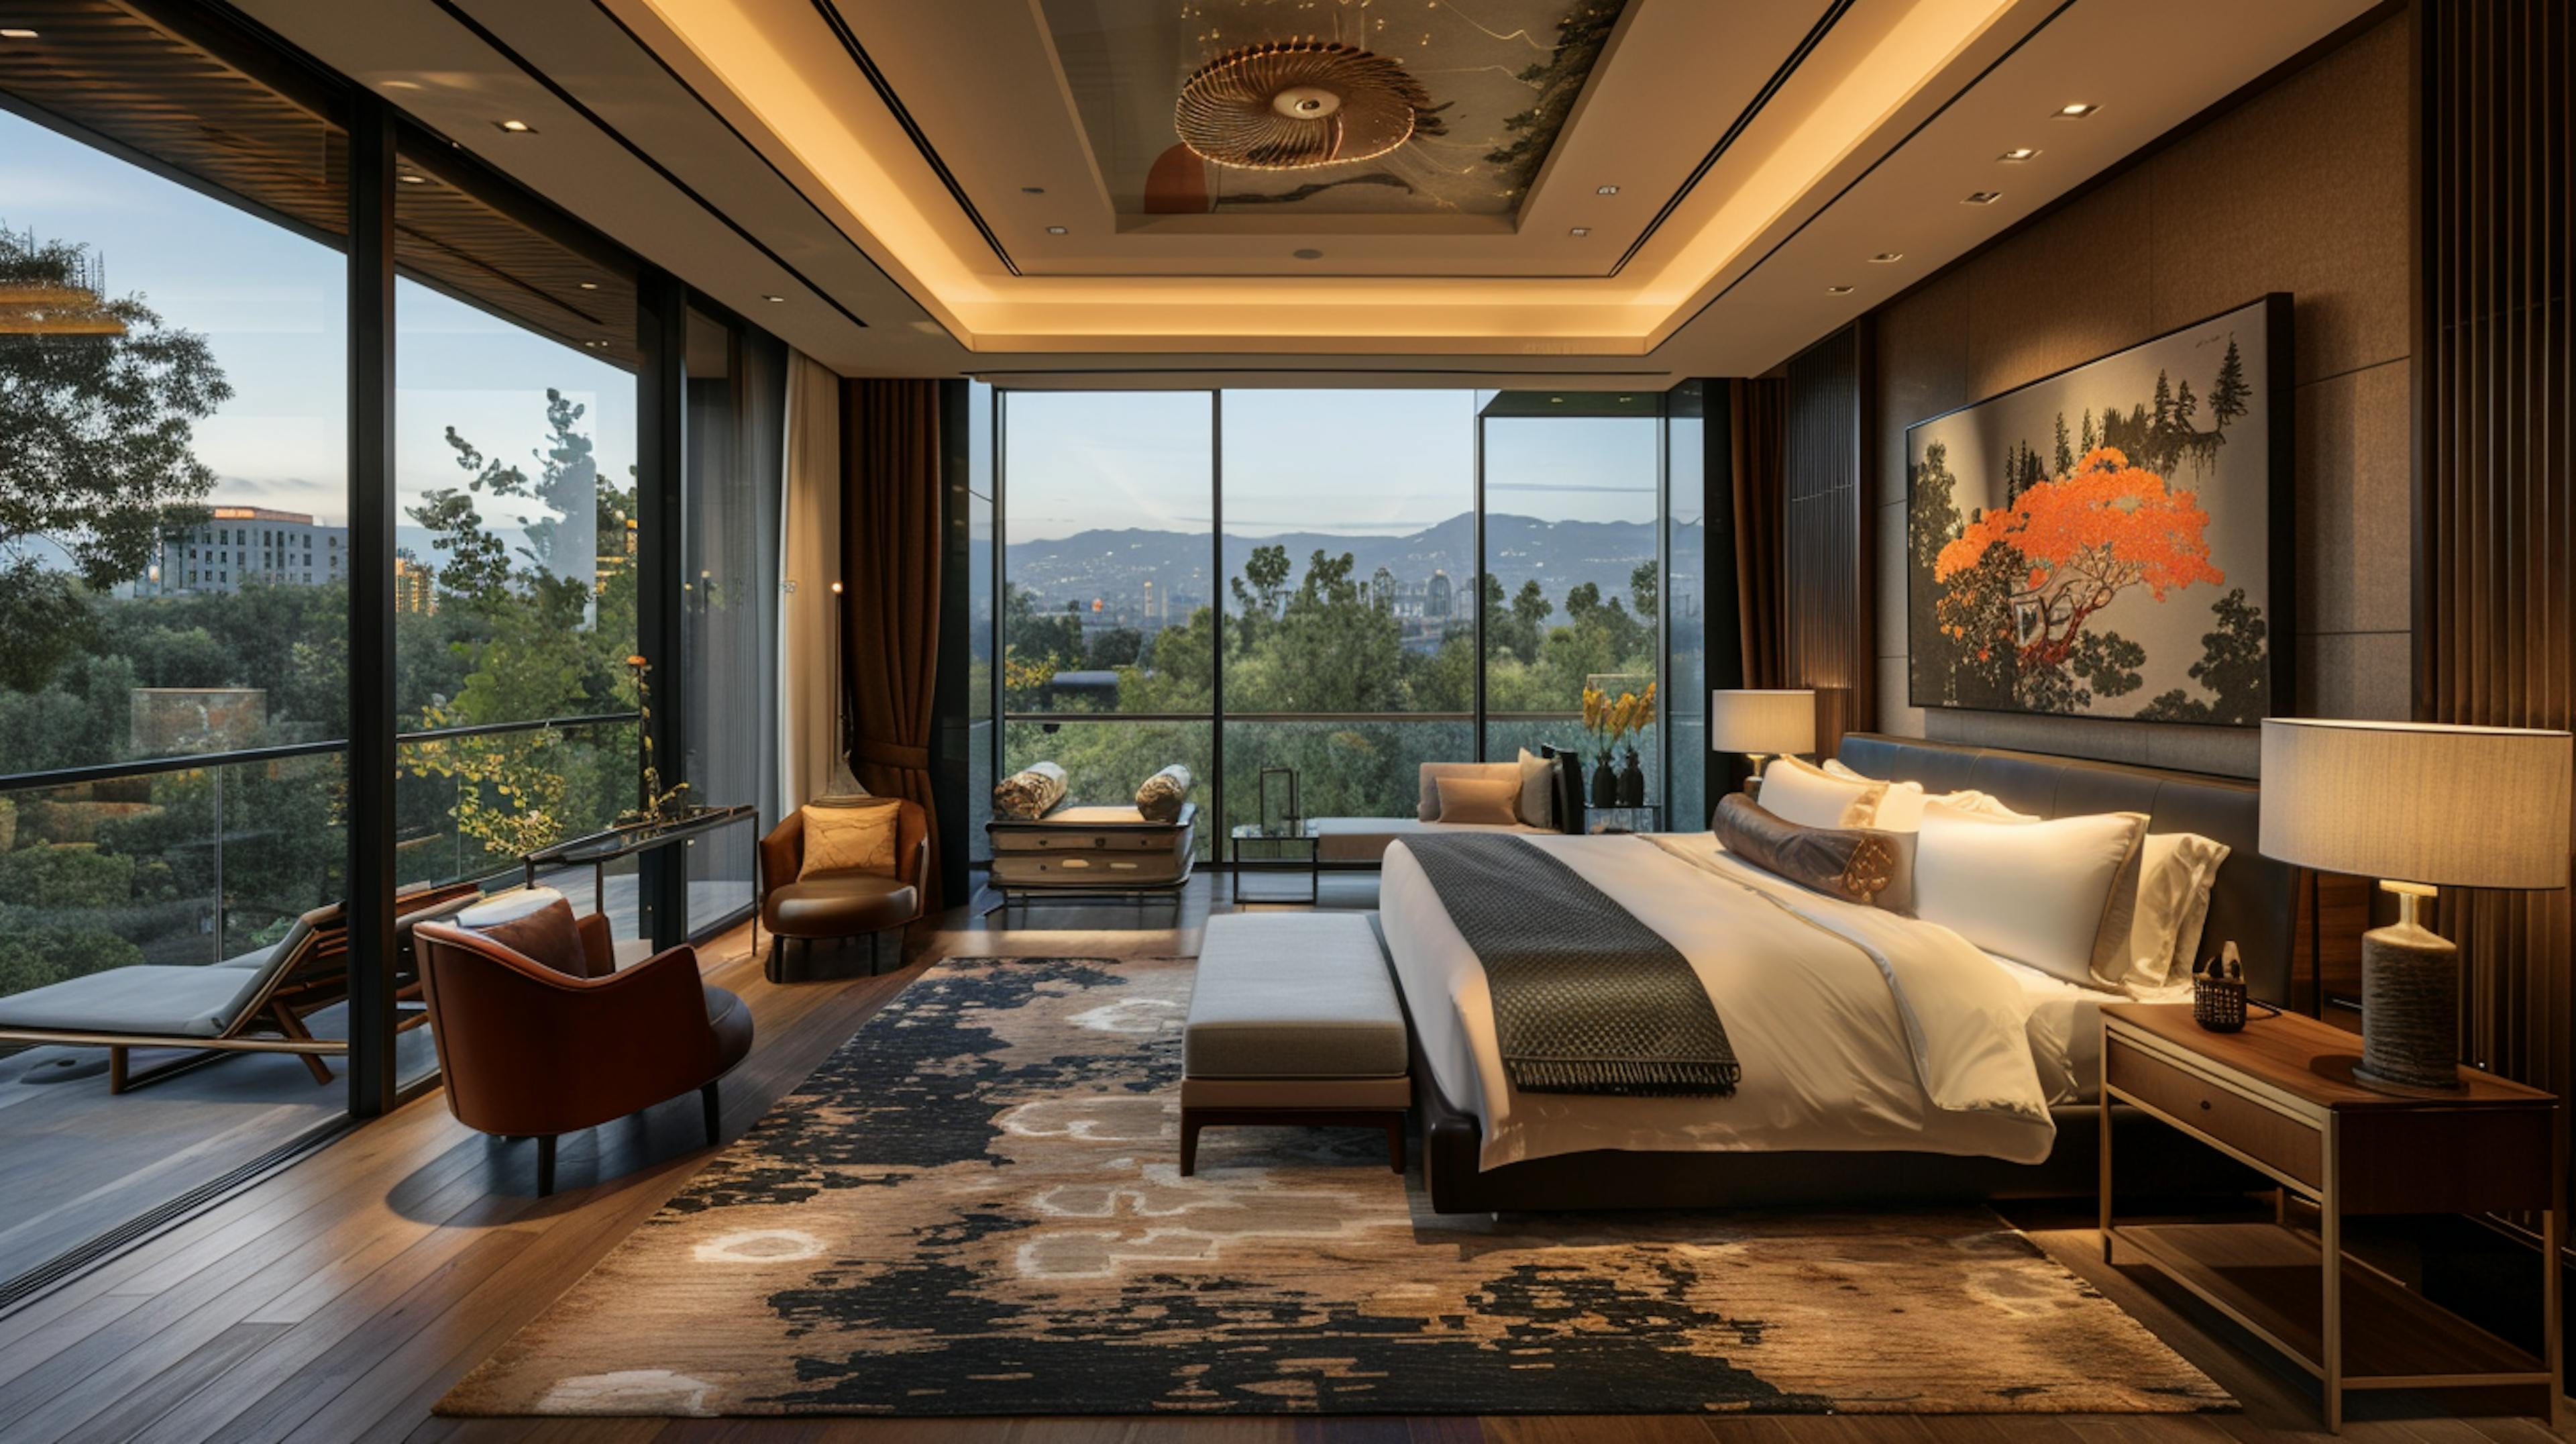 Luxury bedroom with panoramic views and modern decor by Eagle Decor.